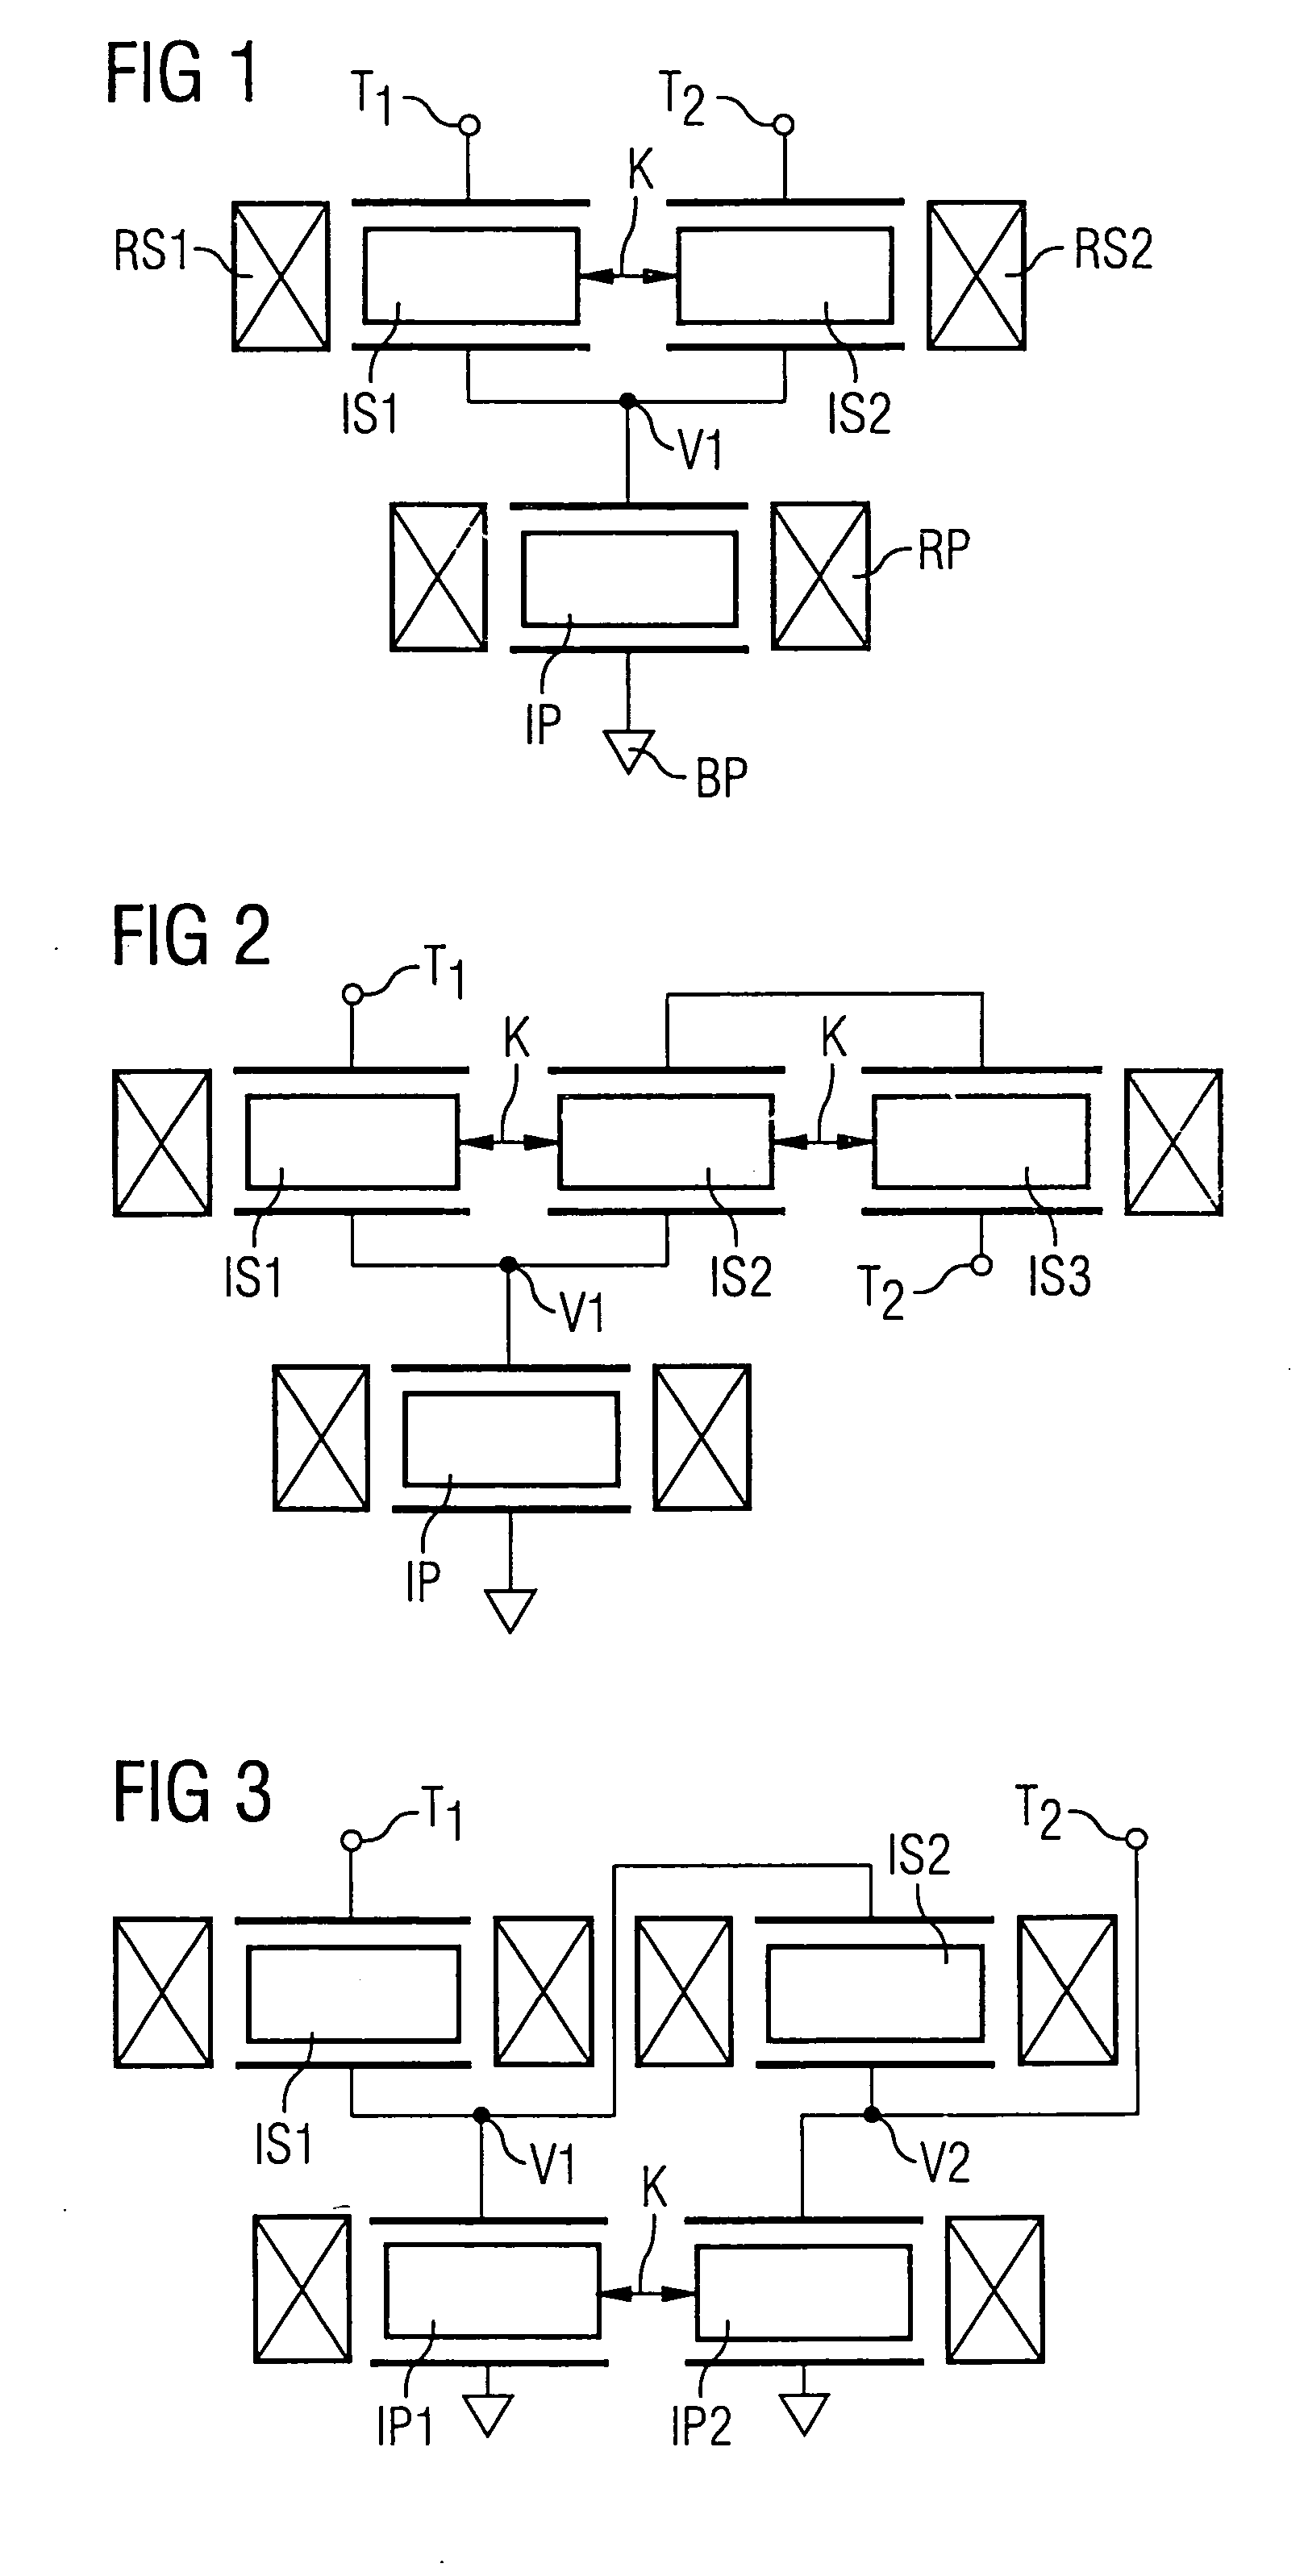 Filter comprising acoustically coupled resonators